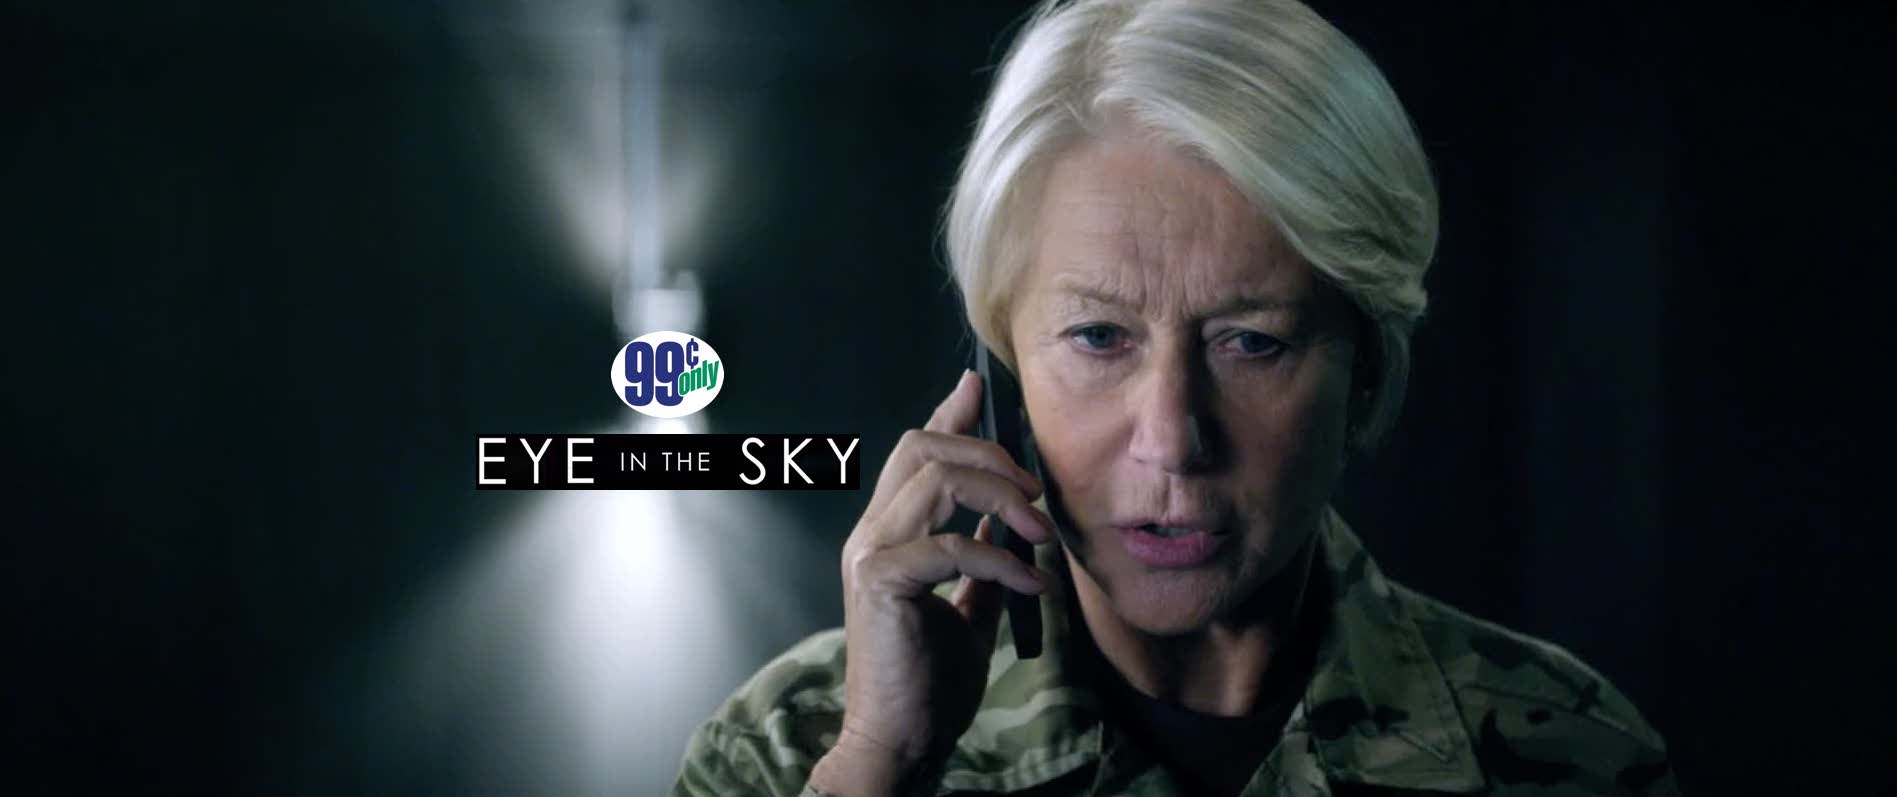 The itunes 99 cent movie of the week: ‘eye in the sky’